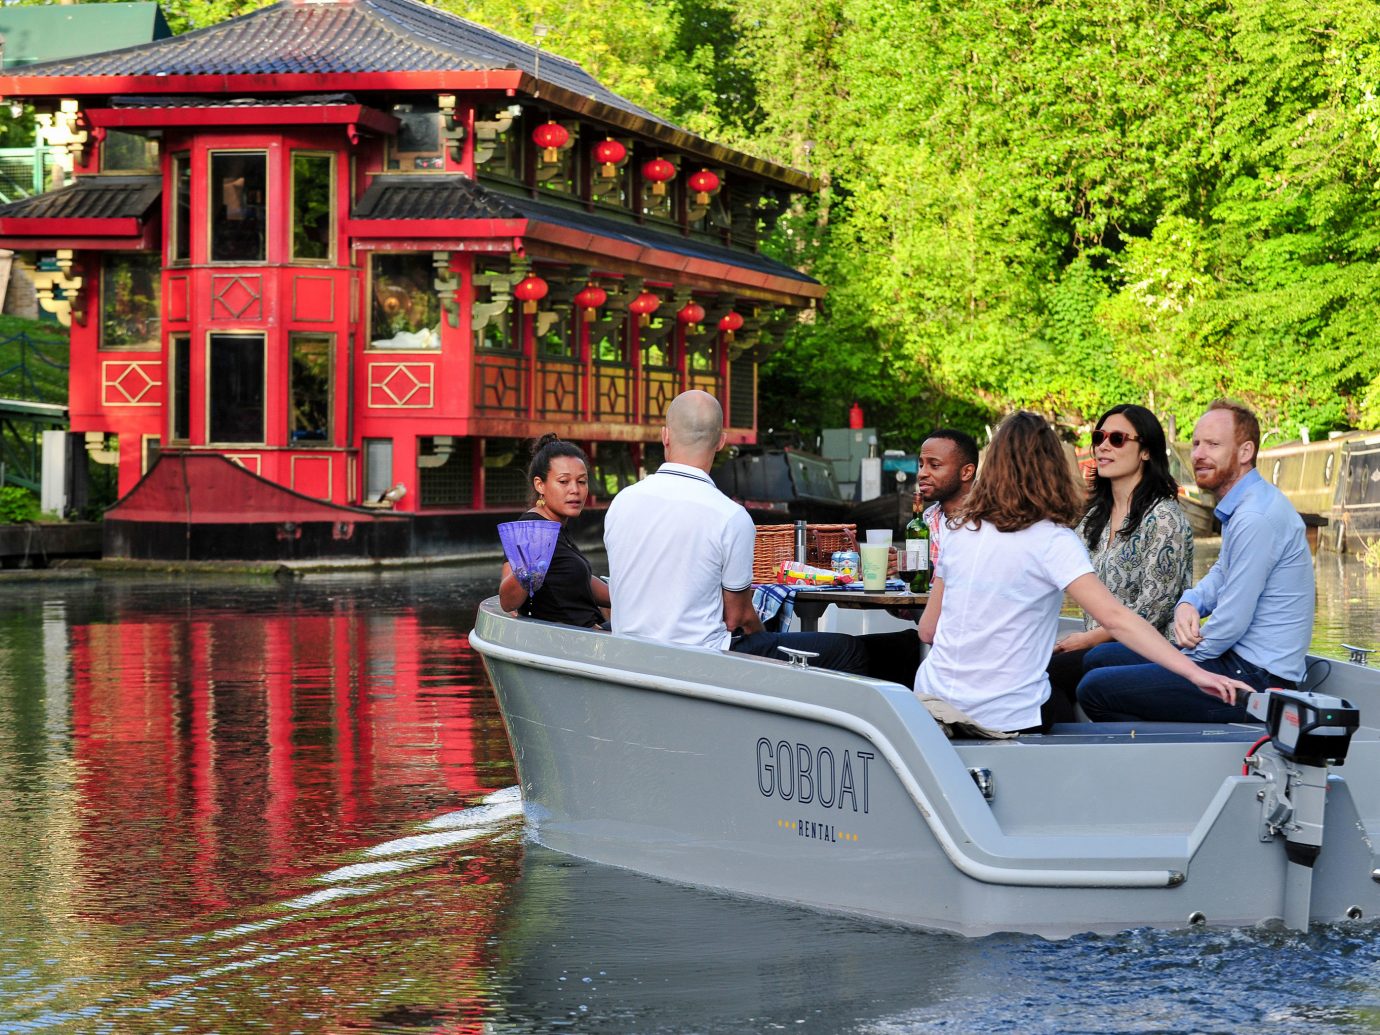 waterway water transportation Boat water plant boating leisure Canal tree recreation vehicle tourism watercraft rowing